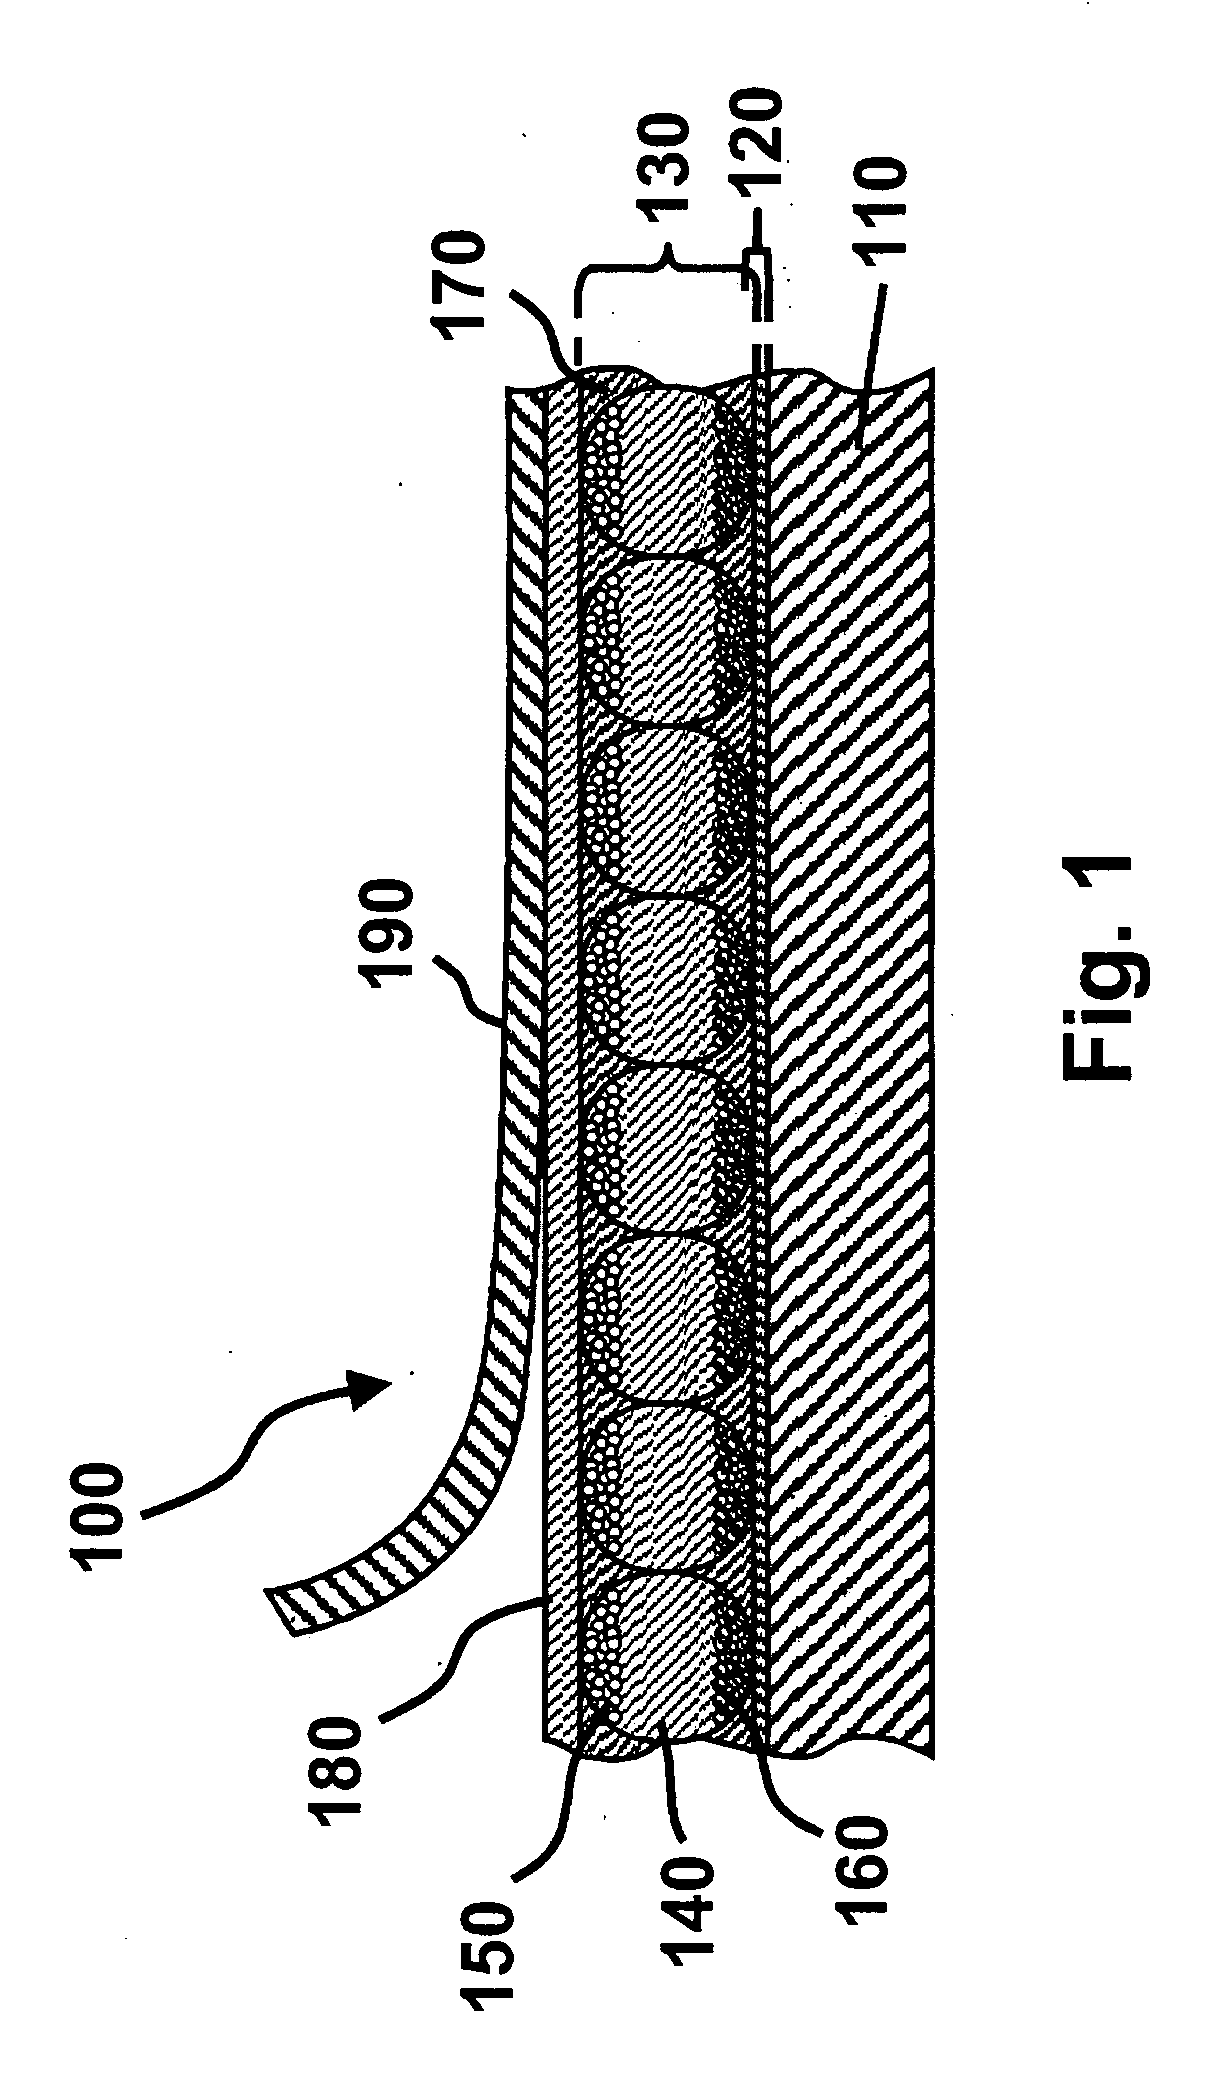 Electro-optic assemblies and materials for use therein